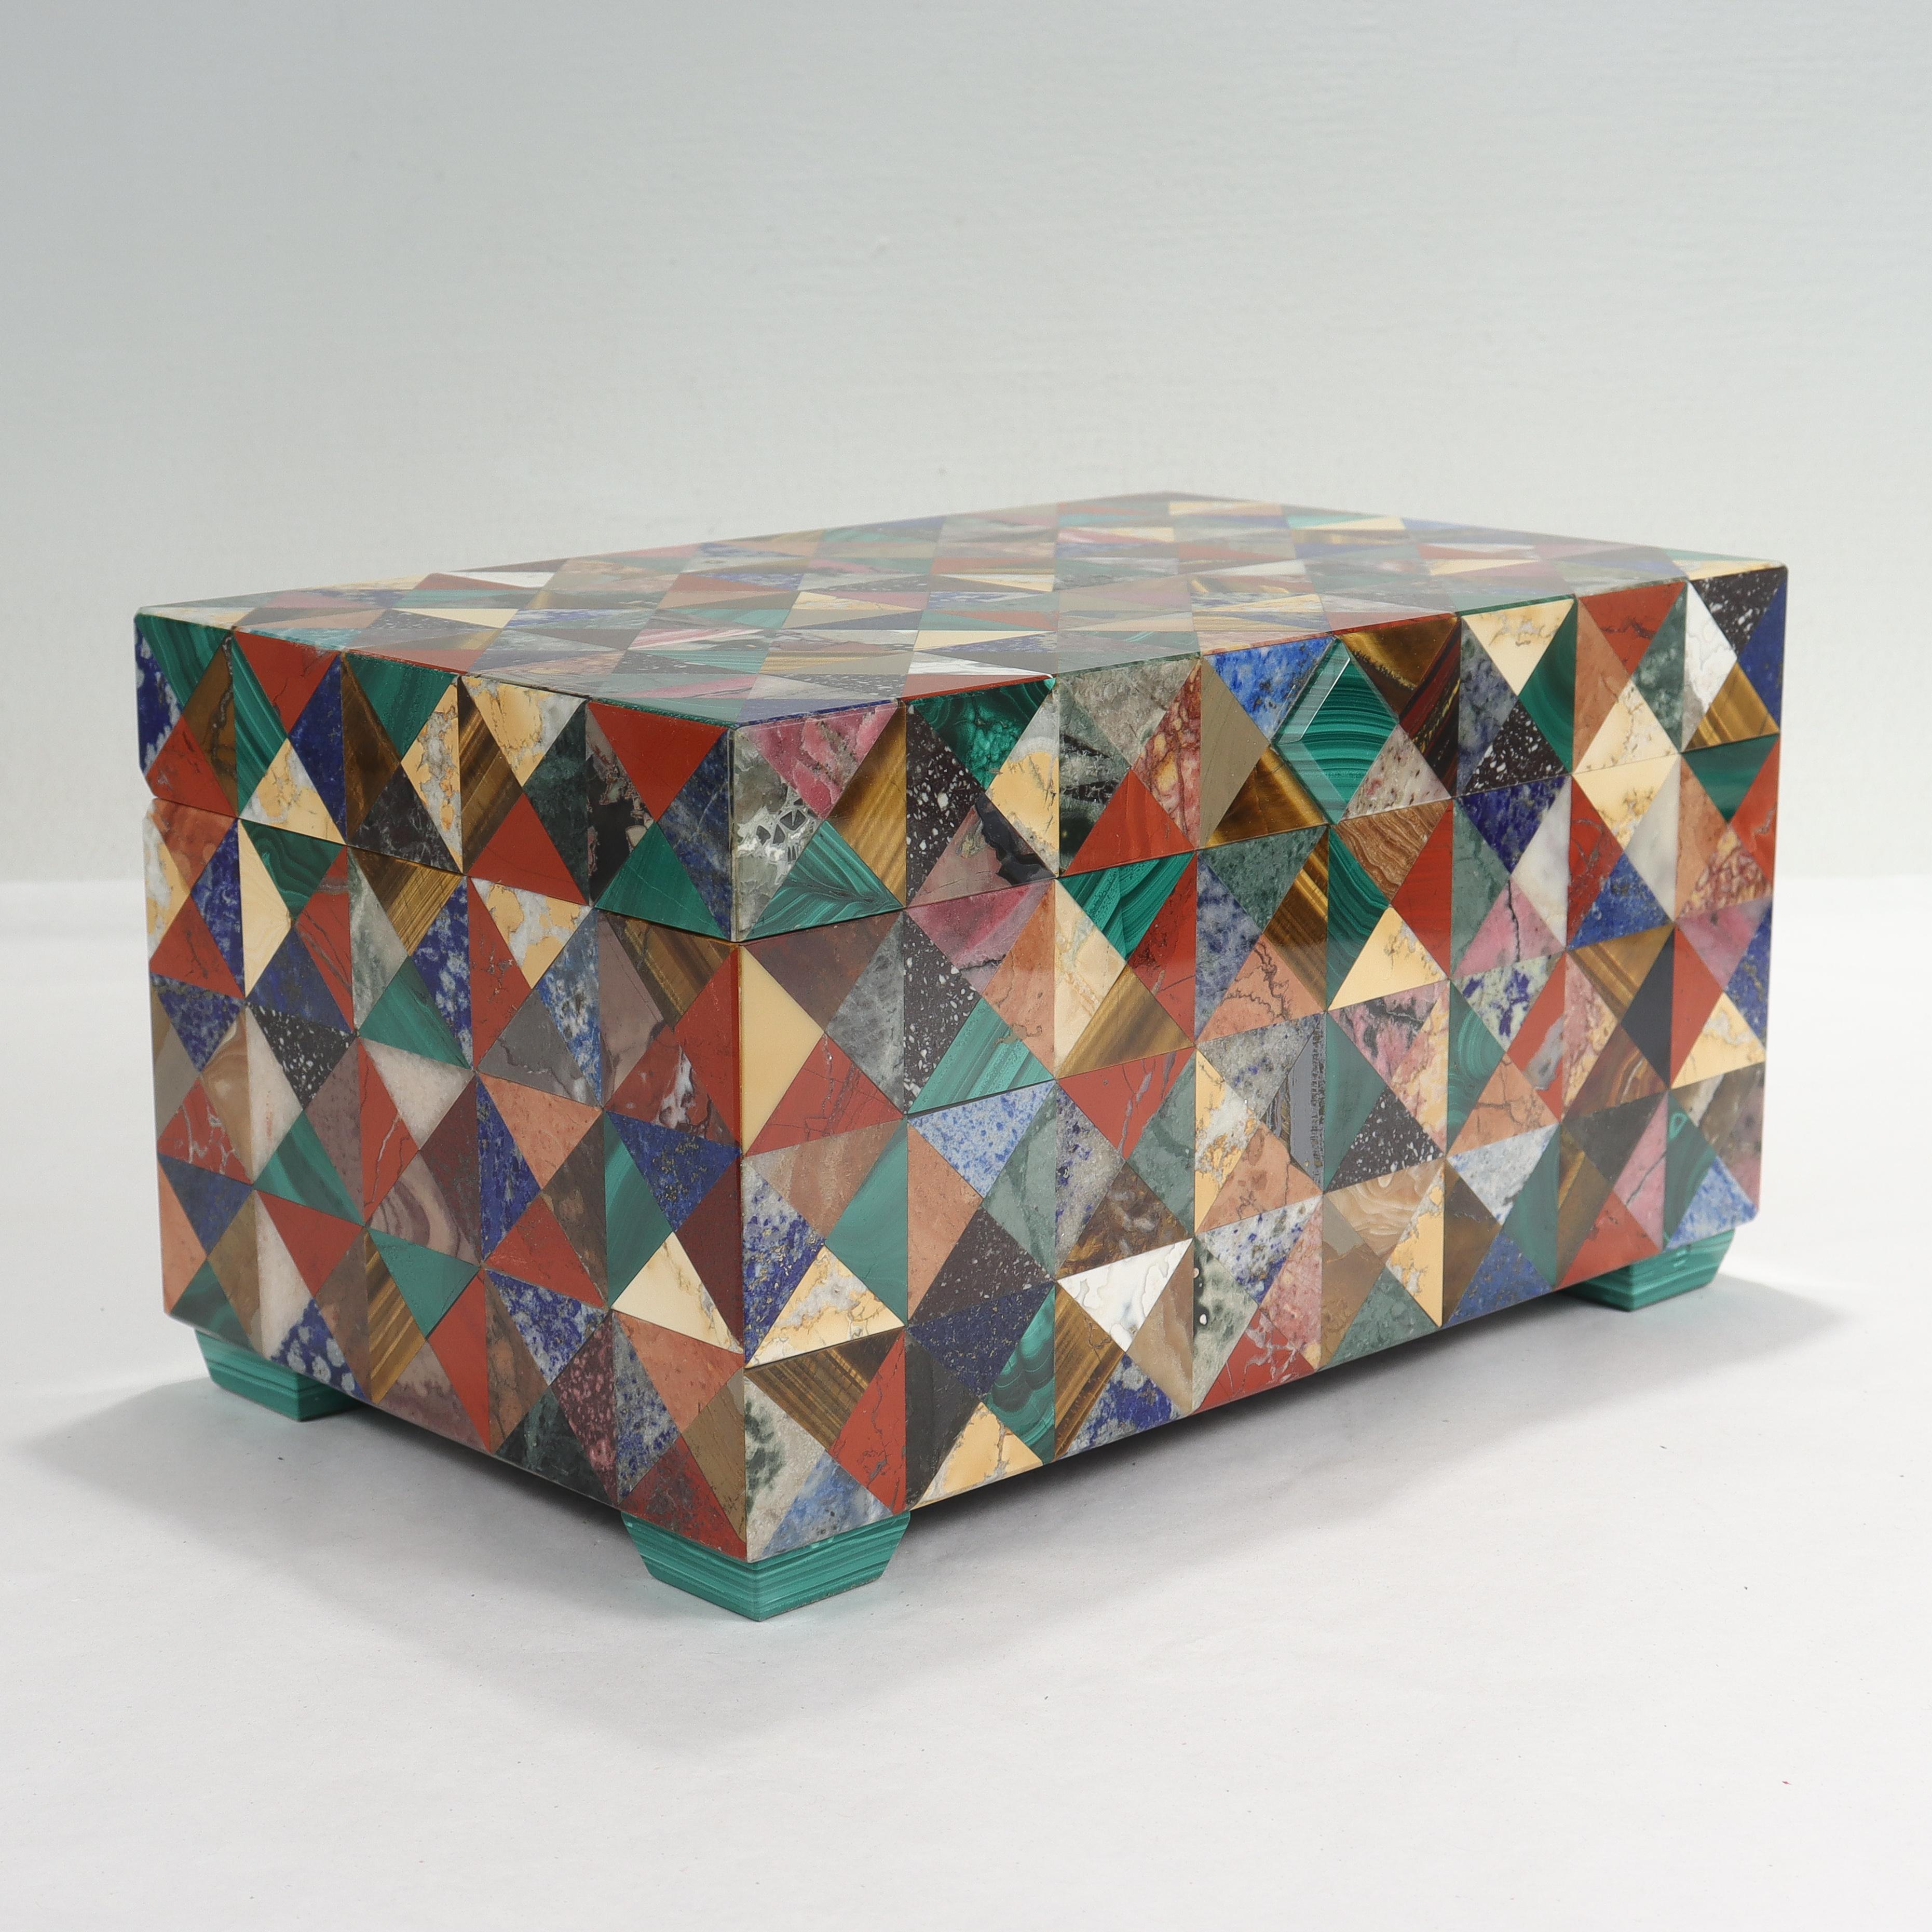 A fine Pietra Dura table box or casket.

By the Raphael Romanelli Company of Florence, Italy.

Comprised of a wide variety of hardstone and gemstone veneers, including malachite, jasper, lapis lazuli, rhodochrosite, and many others.

Of rectangular